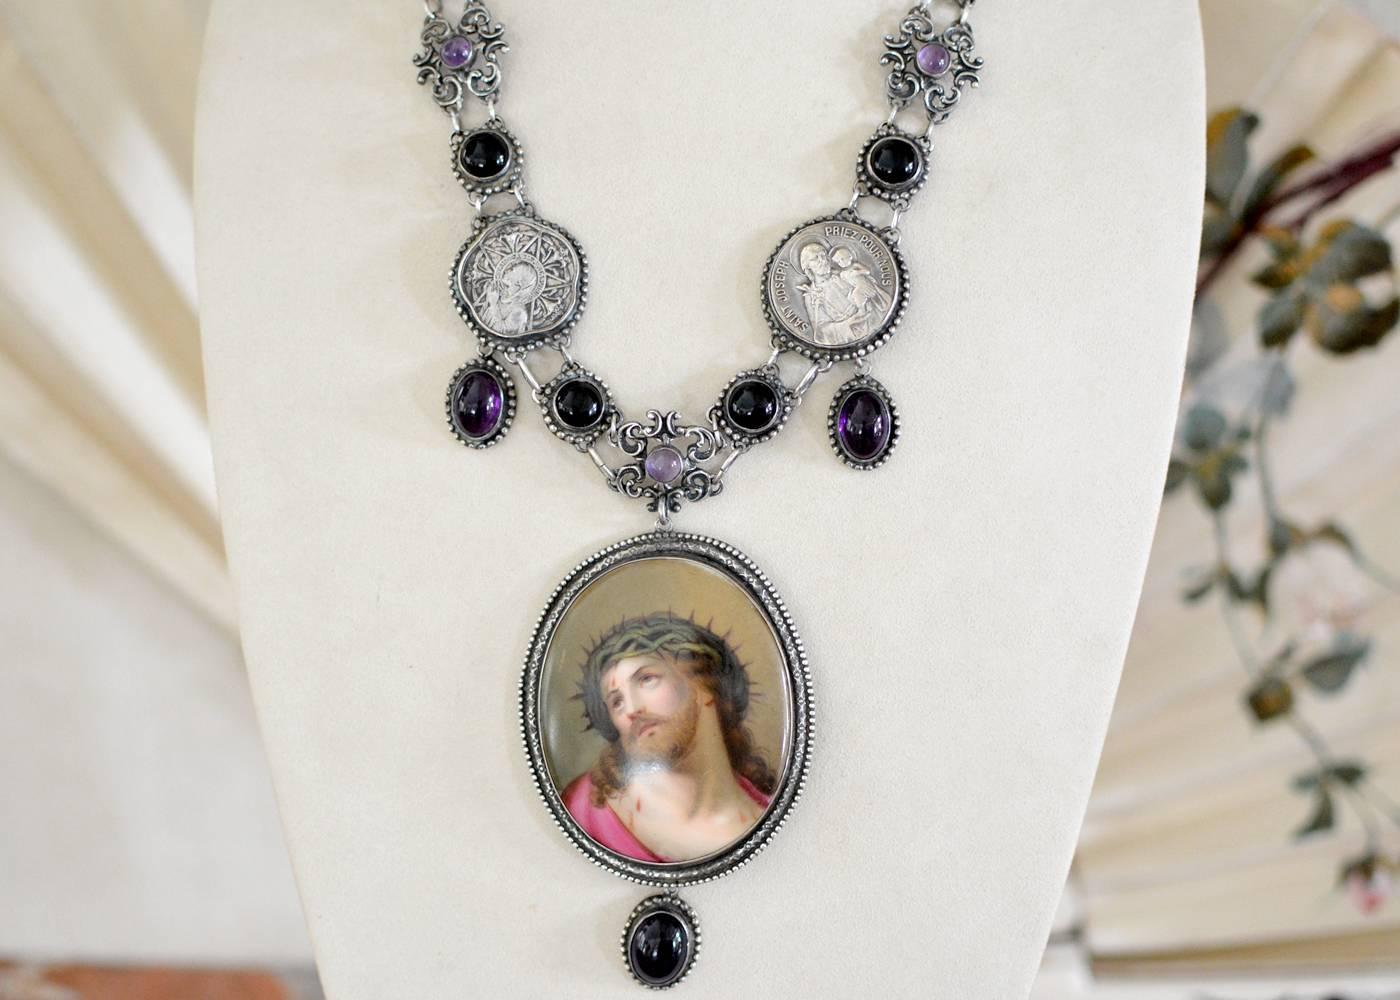 An early nineteenth century sacred French porcelain with an exquisite depiction of Jesus creates the important focal element of this one of a kind necklace. The elaborate collar like chaining combines additional antique nineteenth century elements